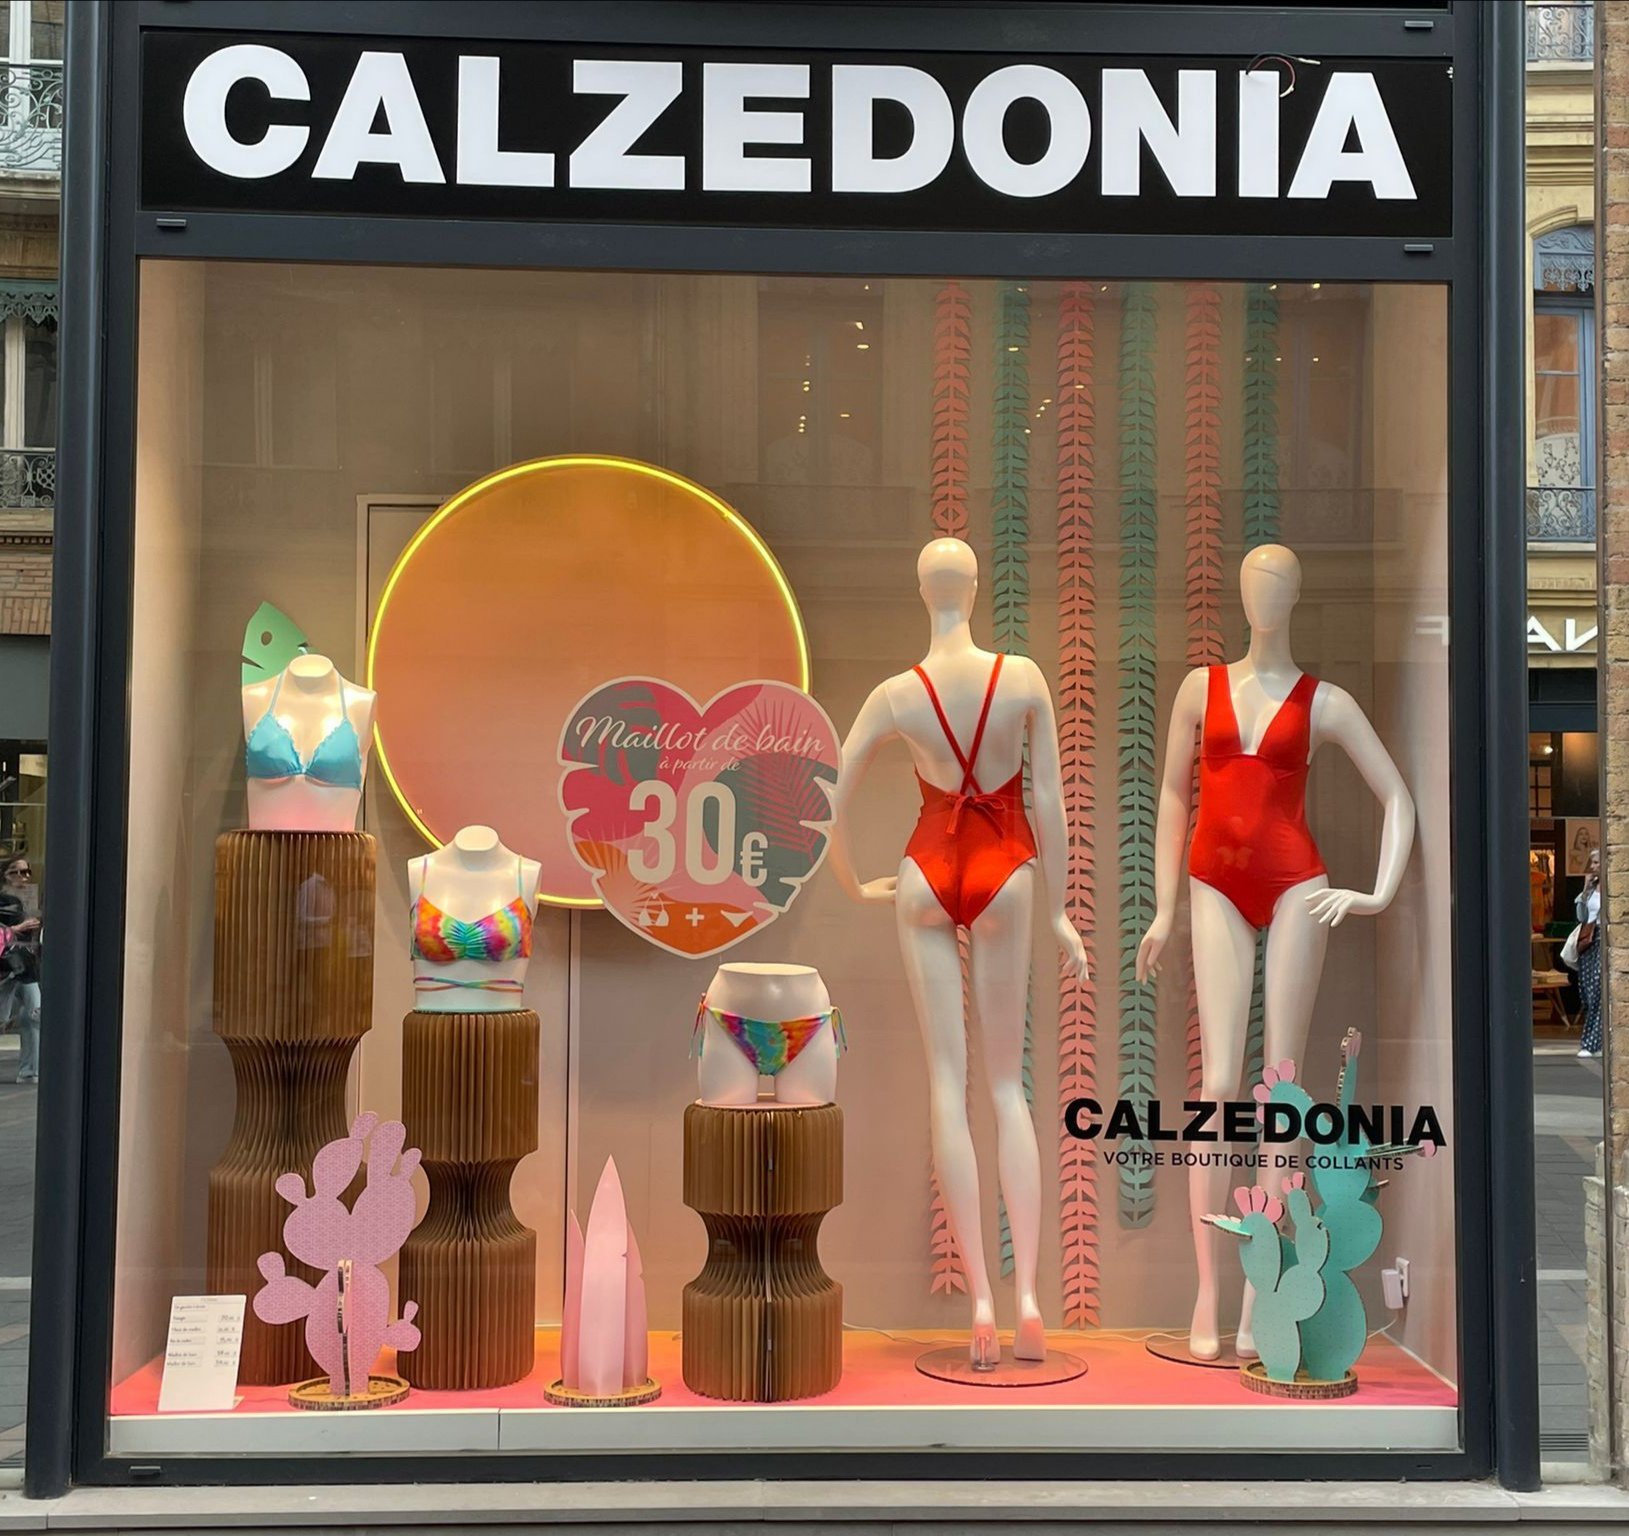 Calzedonia TOULOUSE RUE ALSACE LORRAINE 4